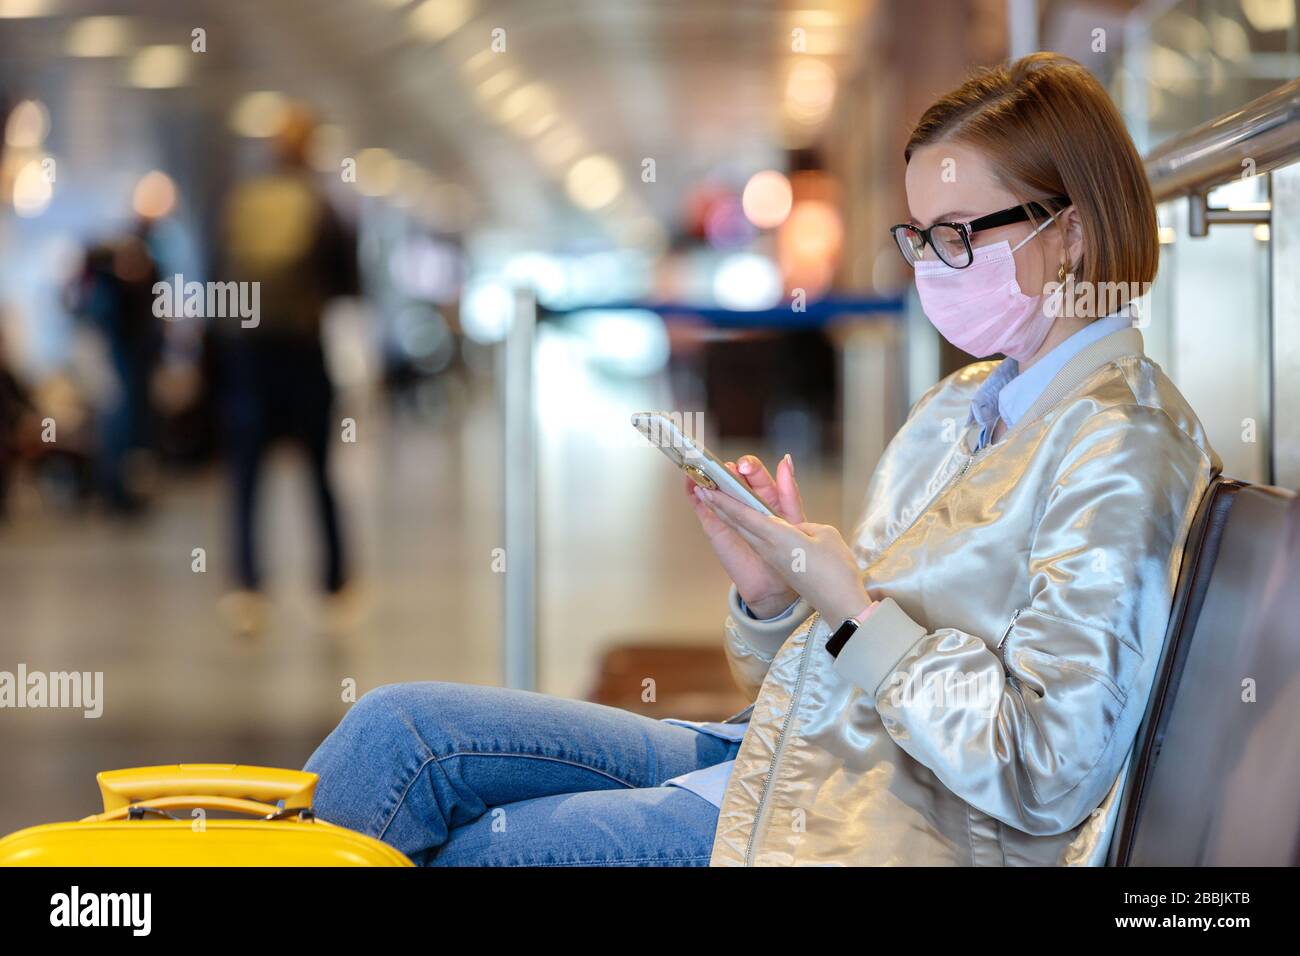 Woman upset over flight cancellation, writes message to family, sitting in almost empty airport terminal due to coronavirus pandemic/Covid-19 outbreak Stock Photo